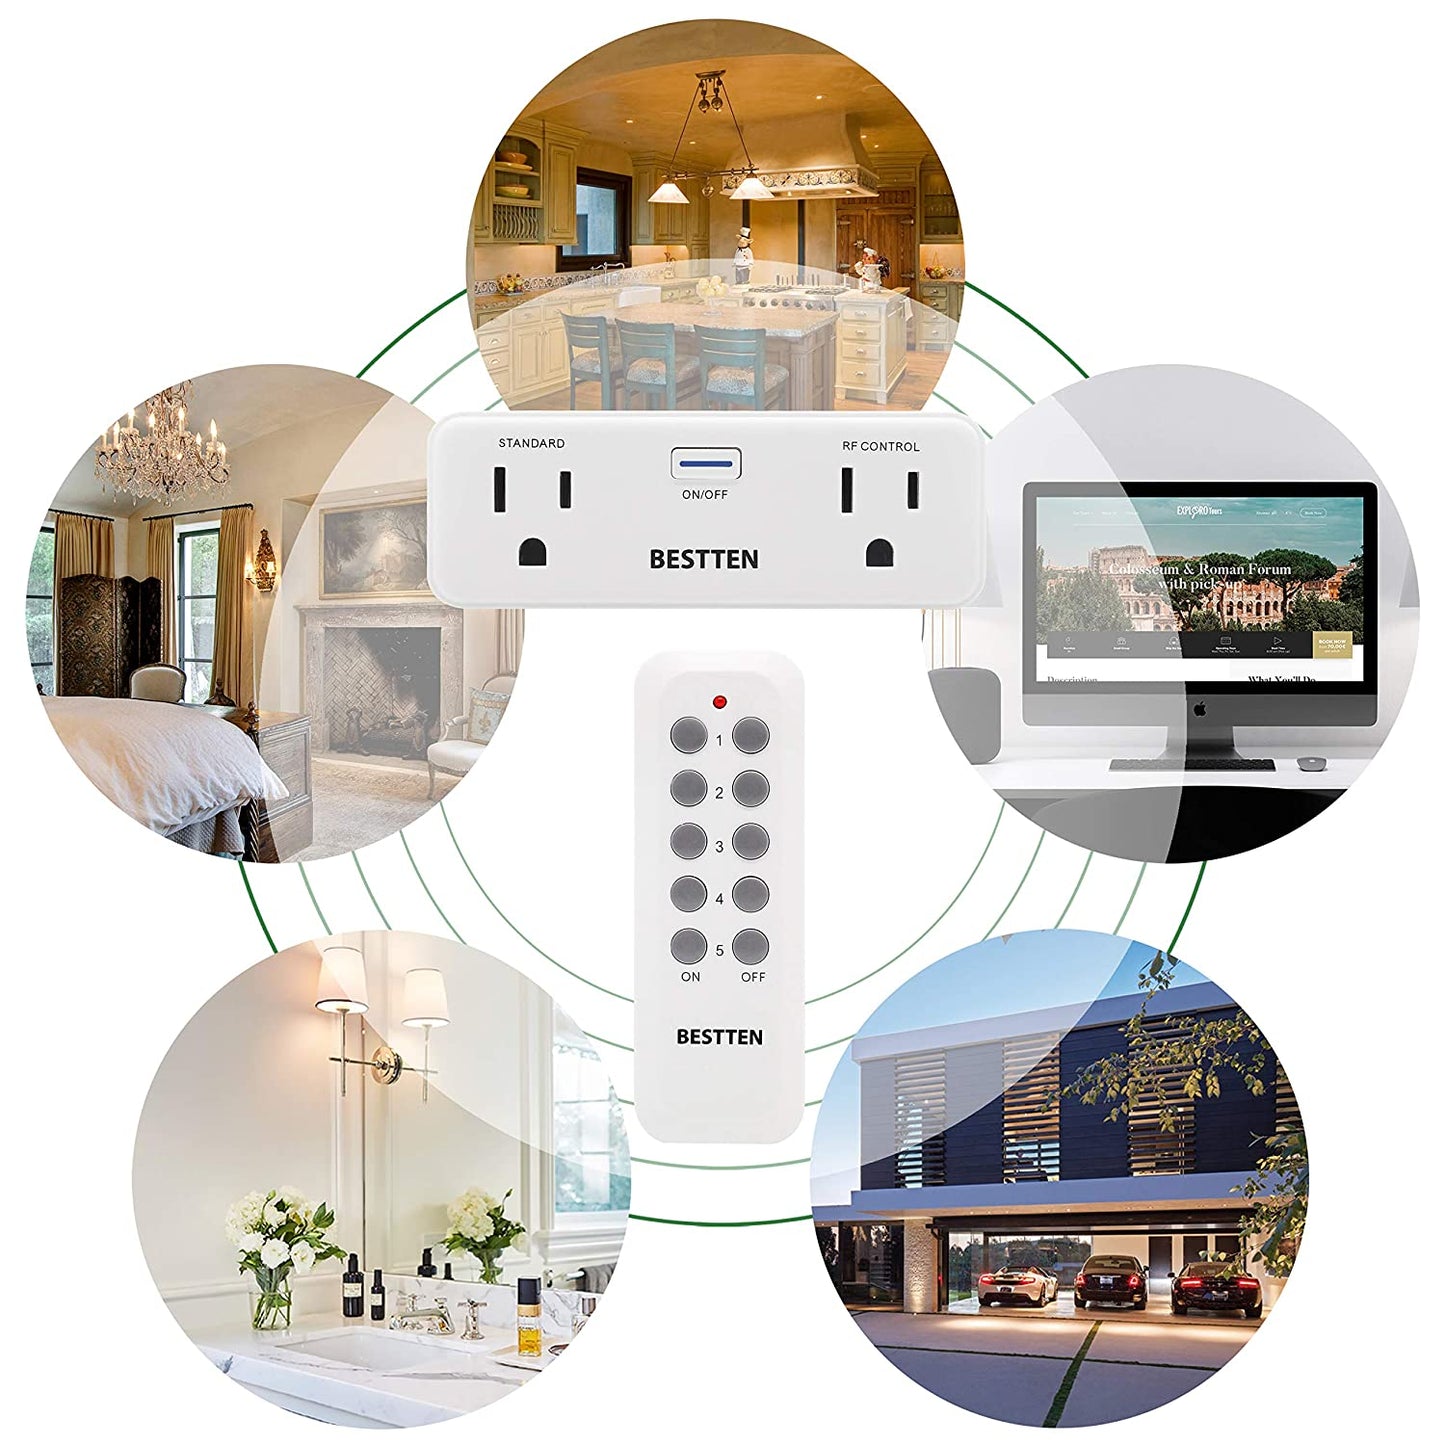 BESTTEN Wireless Remote Control Outlet Combo Kit (5 Wall Outlets + 2 Remotes), Always-ON & 1 RF Control Sockets (White)